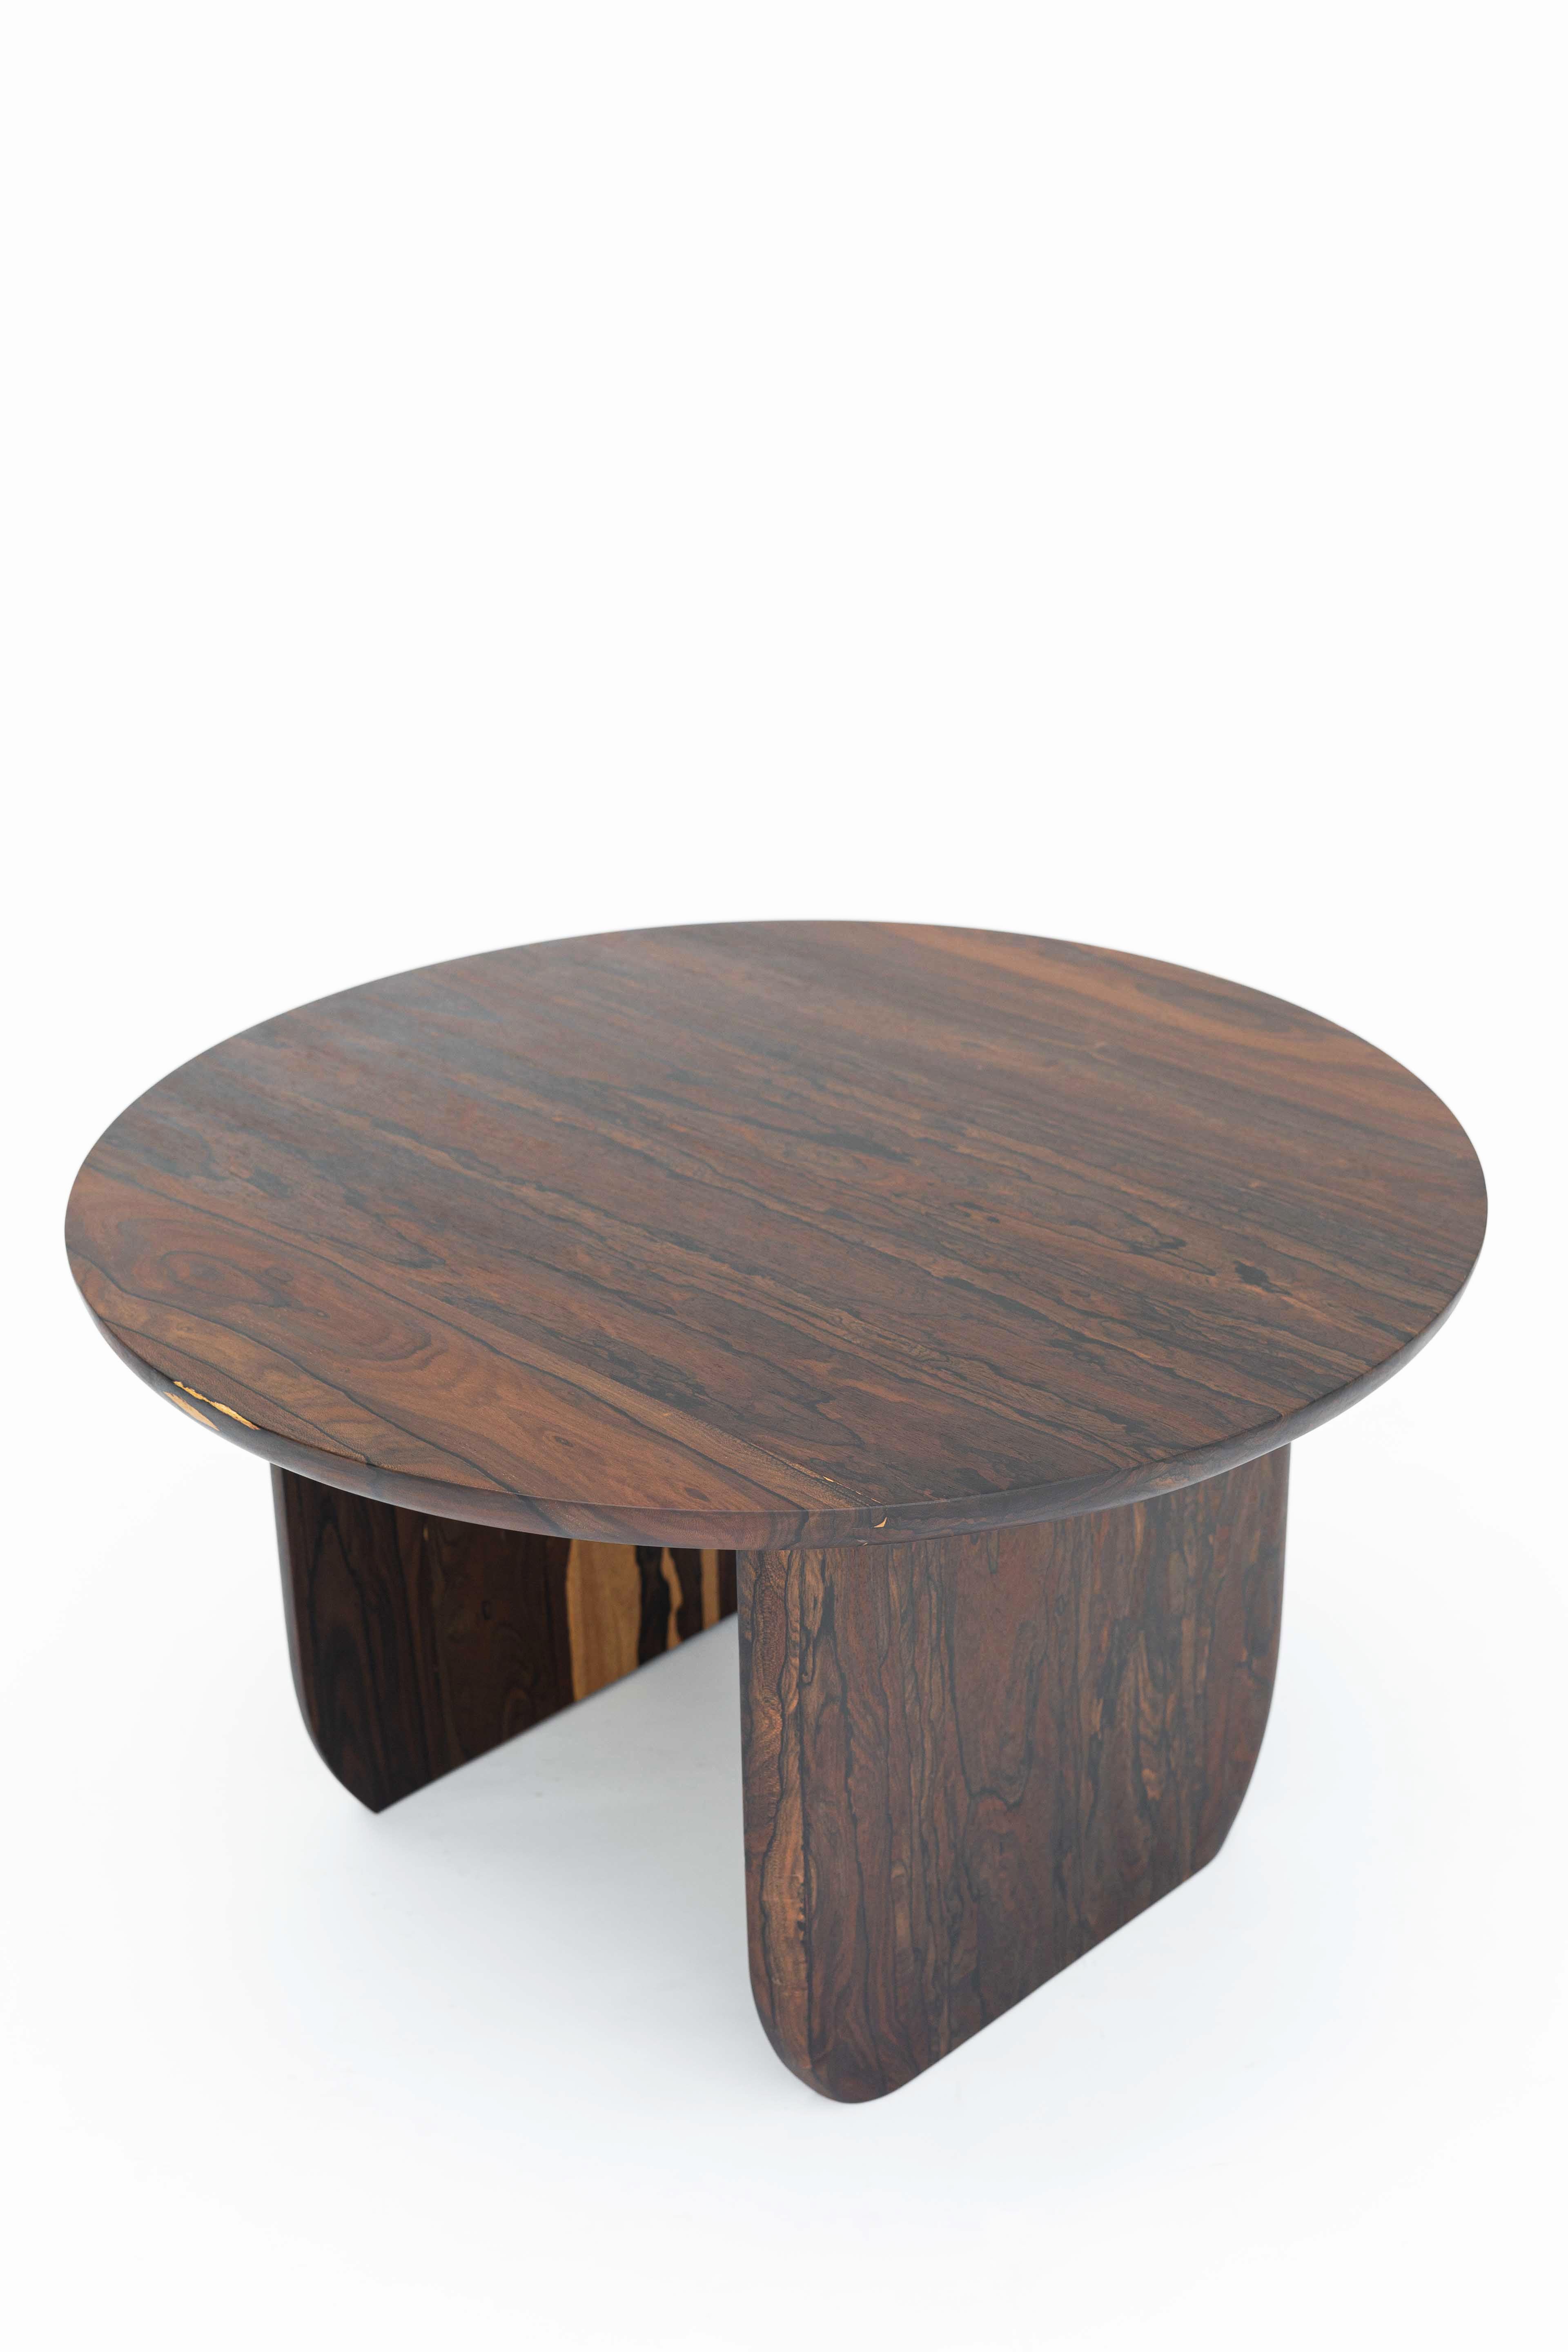 This Coffee Table is elaborated by using remarkable wood planks from the Ziricote tree, one of South Mexico’s most valued hardwoods. It is characterized by its beautiful natural drawings with color tones ranging from brown to black and a